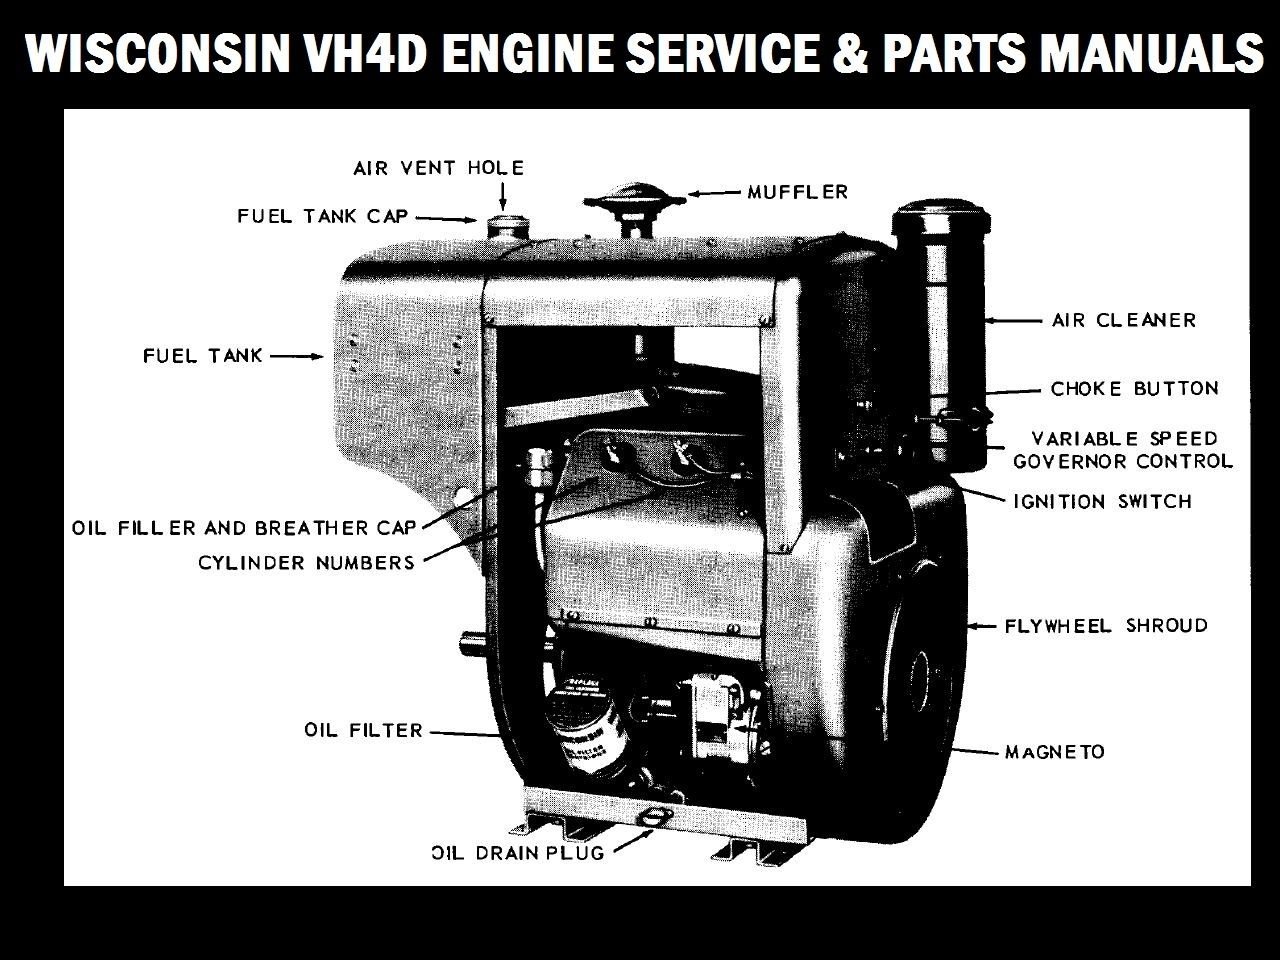 WISCONSIN VH4D 4cyl ENGINE SERVICE and PARTS MANUALs for VH 4D...